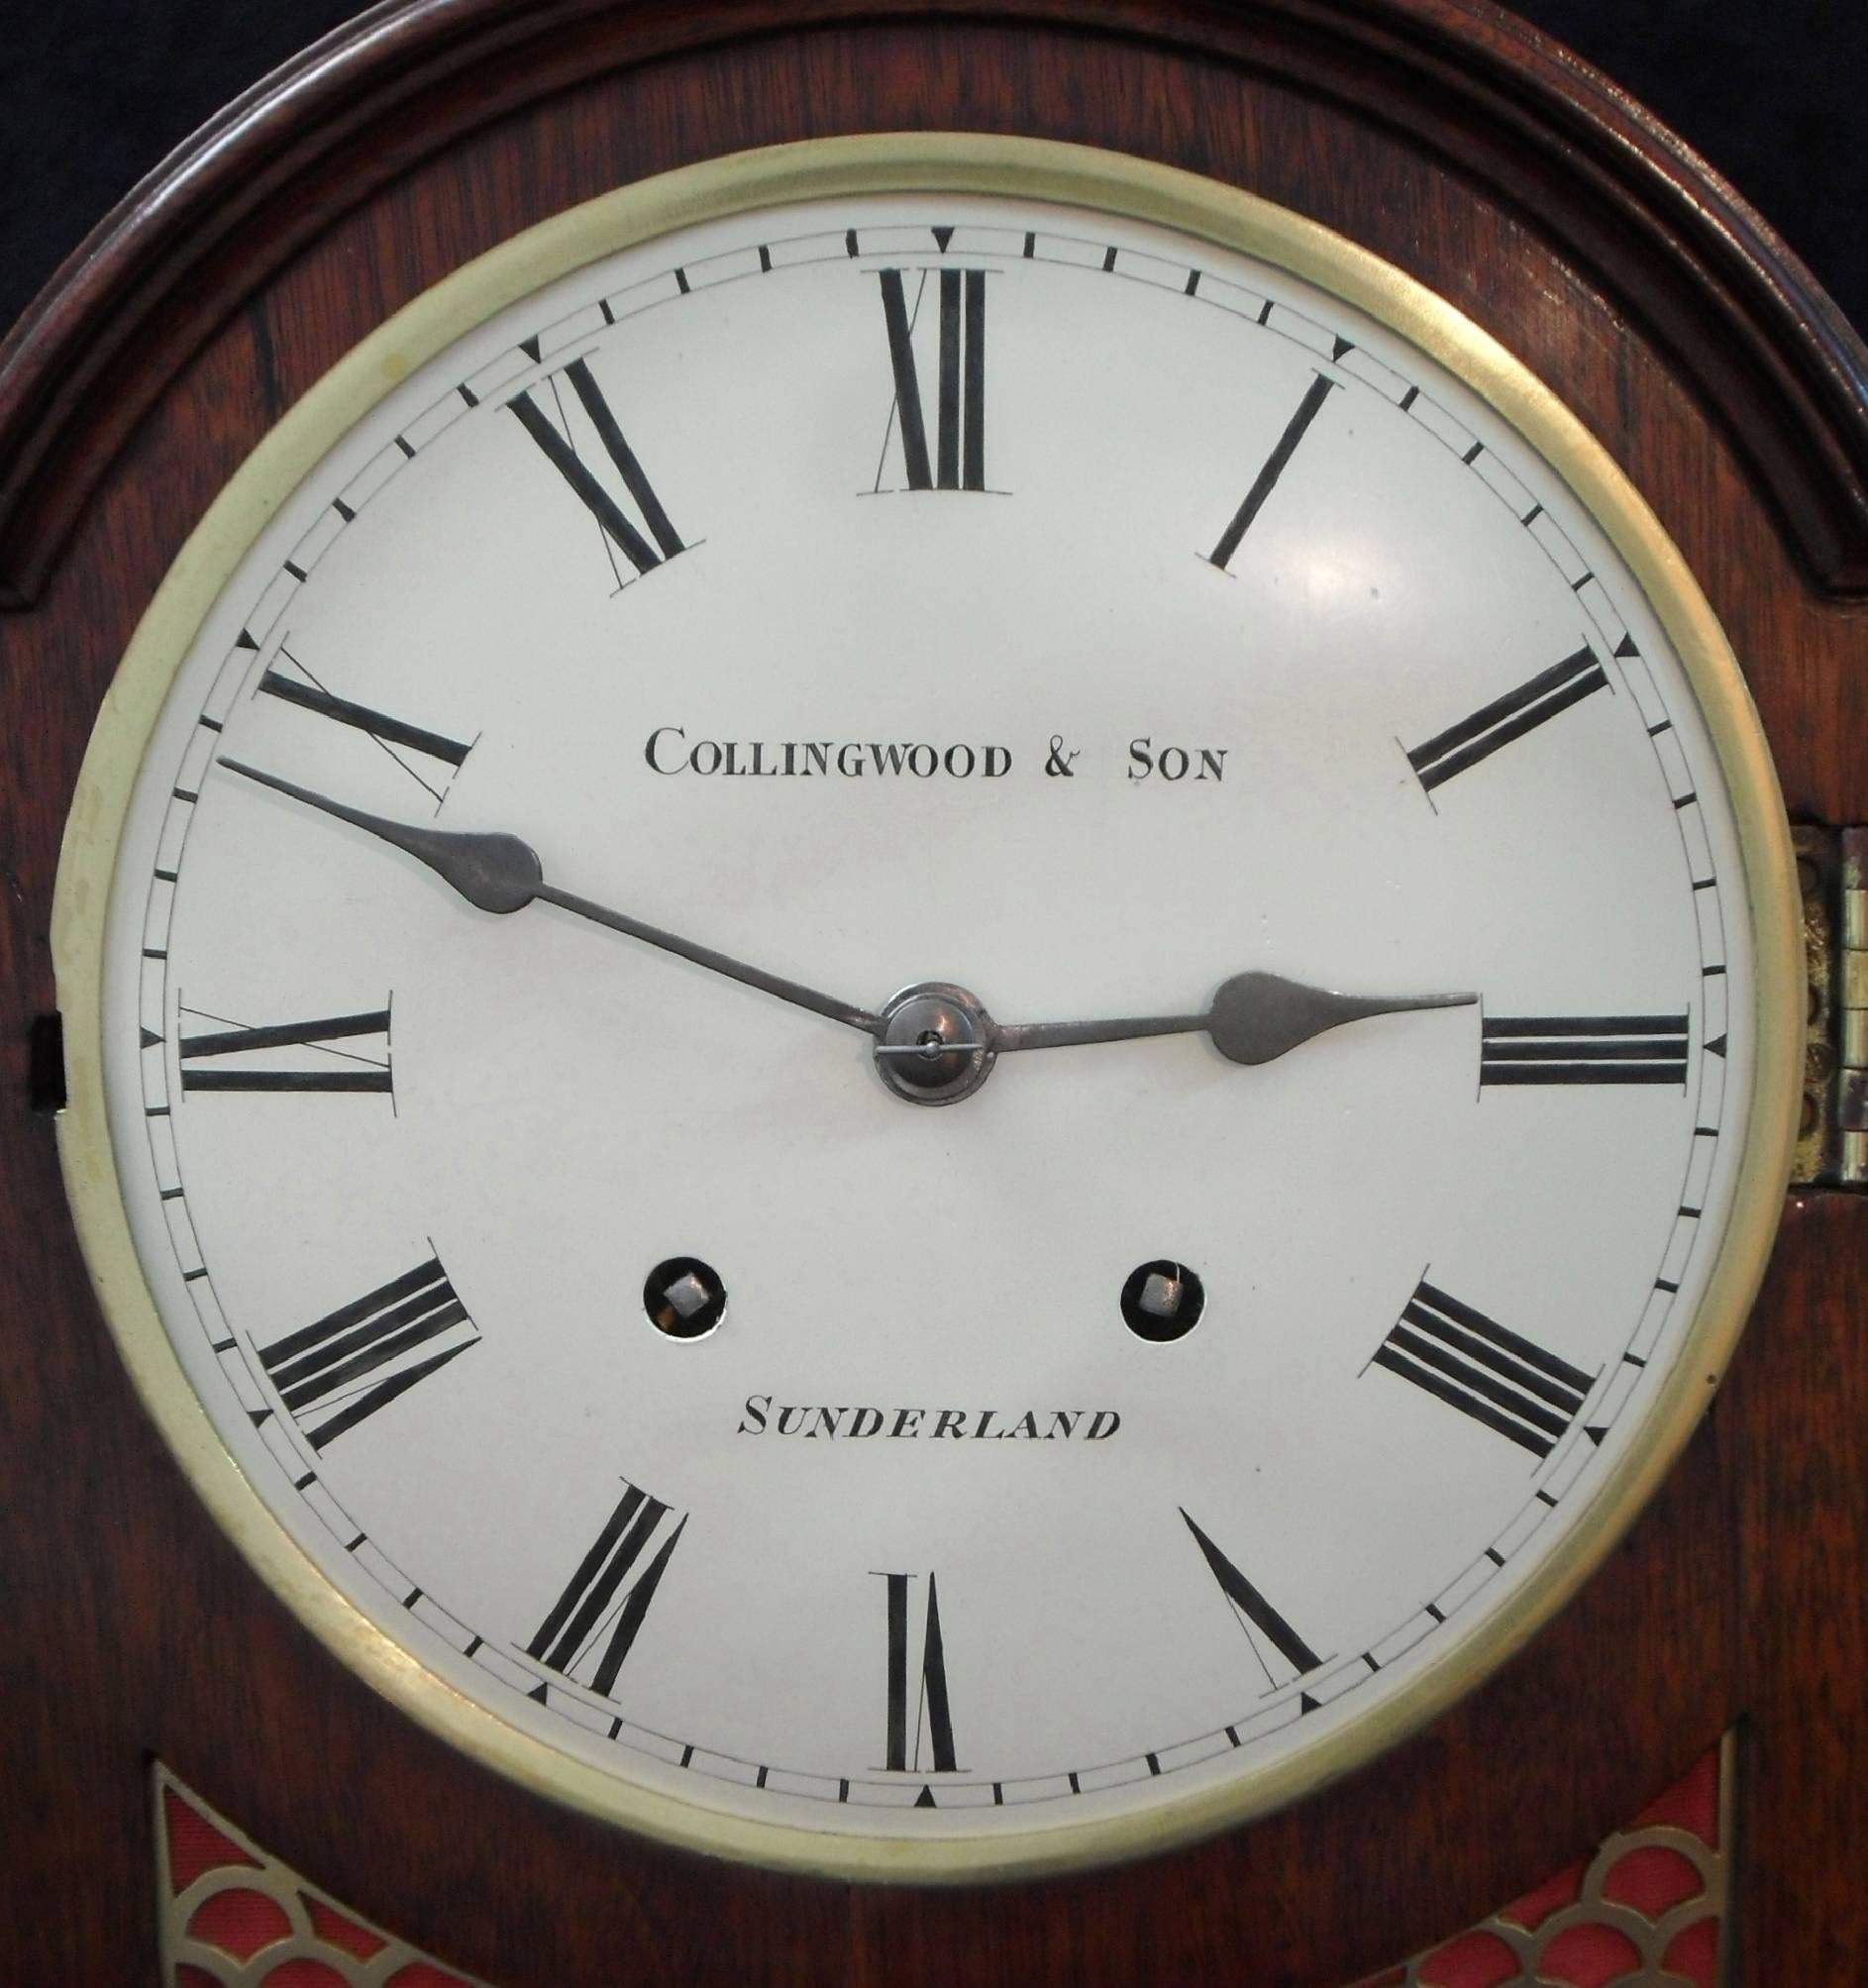 A very good quality mahogany bracket clock with fish scale sound frets to the front and side stood on brass ball feet with carrying handle.

The clock has a white enamel dial with the retailers name:-

Collingwood & Son
Sunderland

The